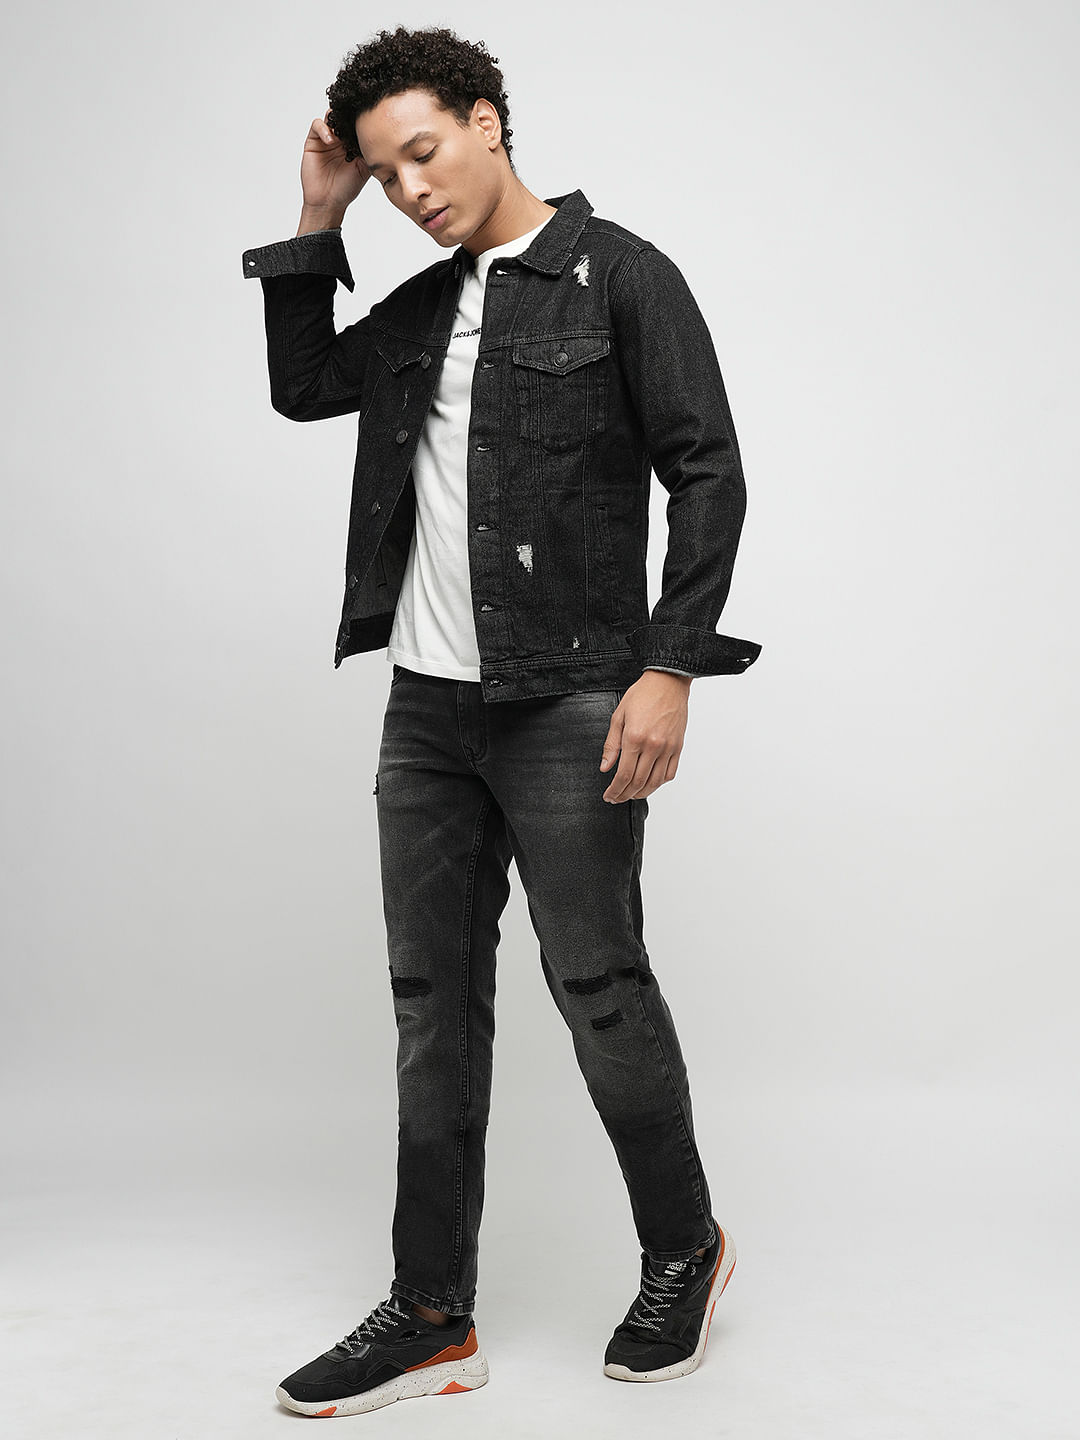 Black Crew-neck T-shirt with Denim Jacket Outfits For Men (205 ideas &  outfits) | Lookastic